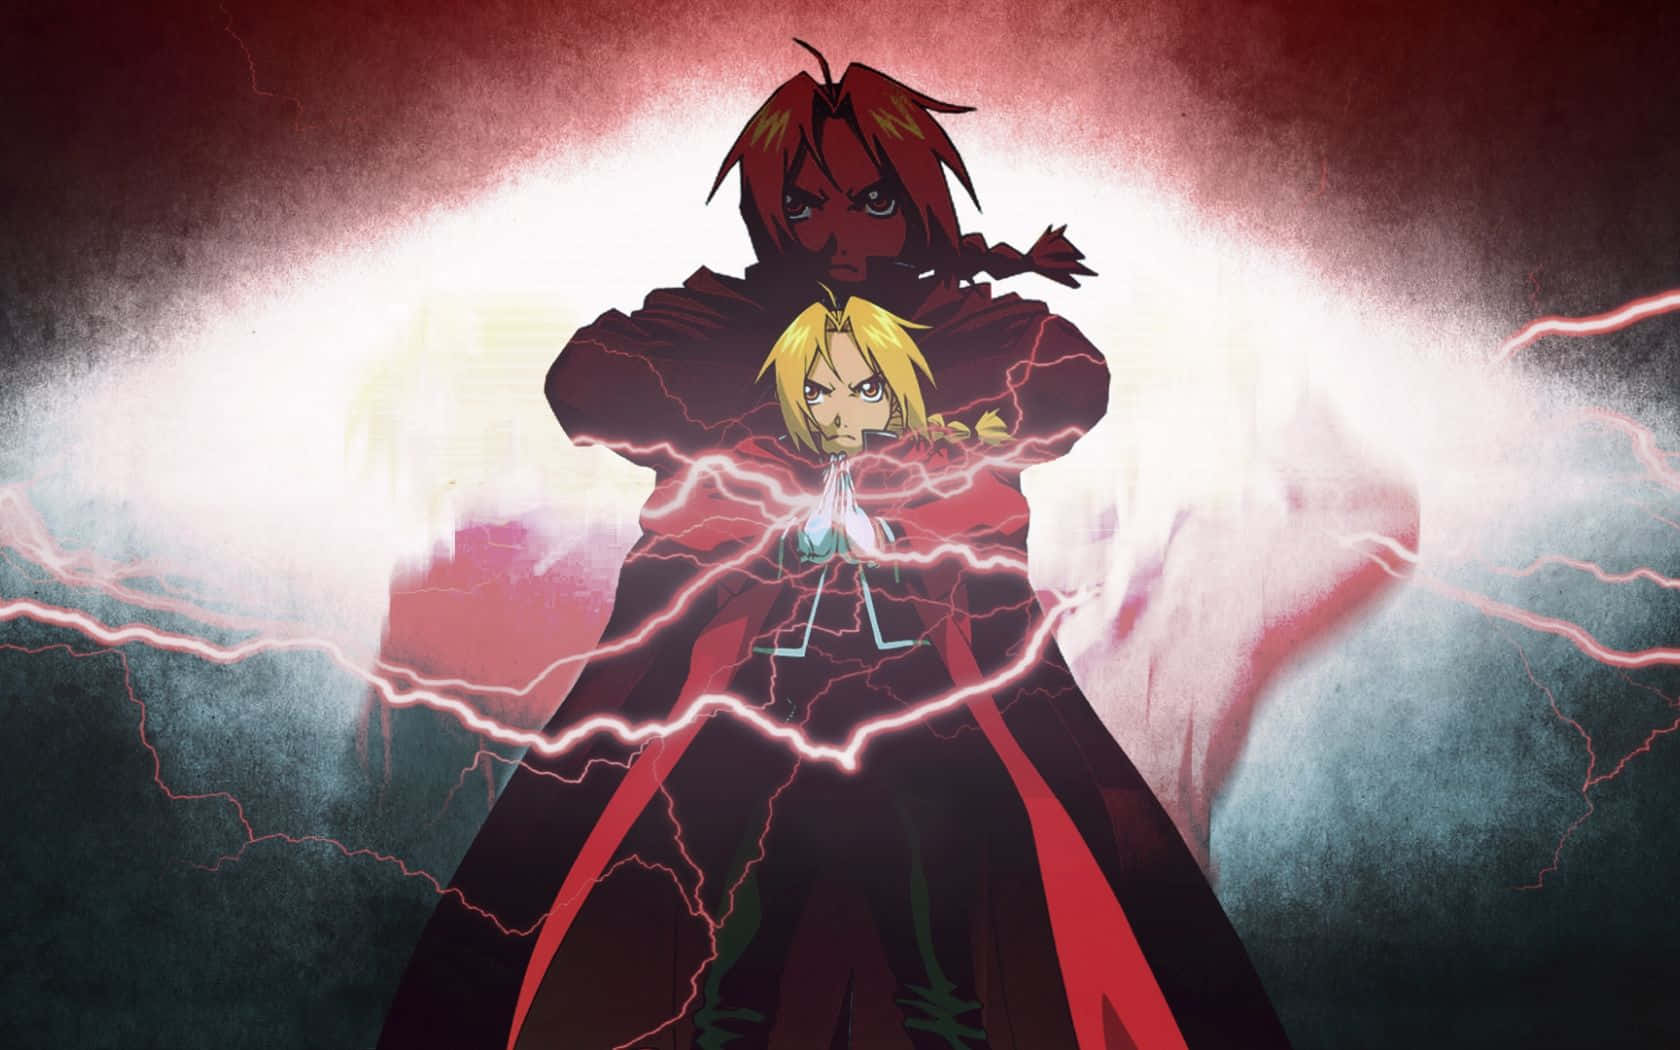 The Determined Alchemist - Edward Elric